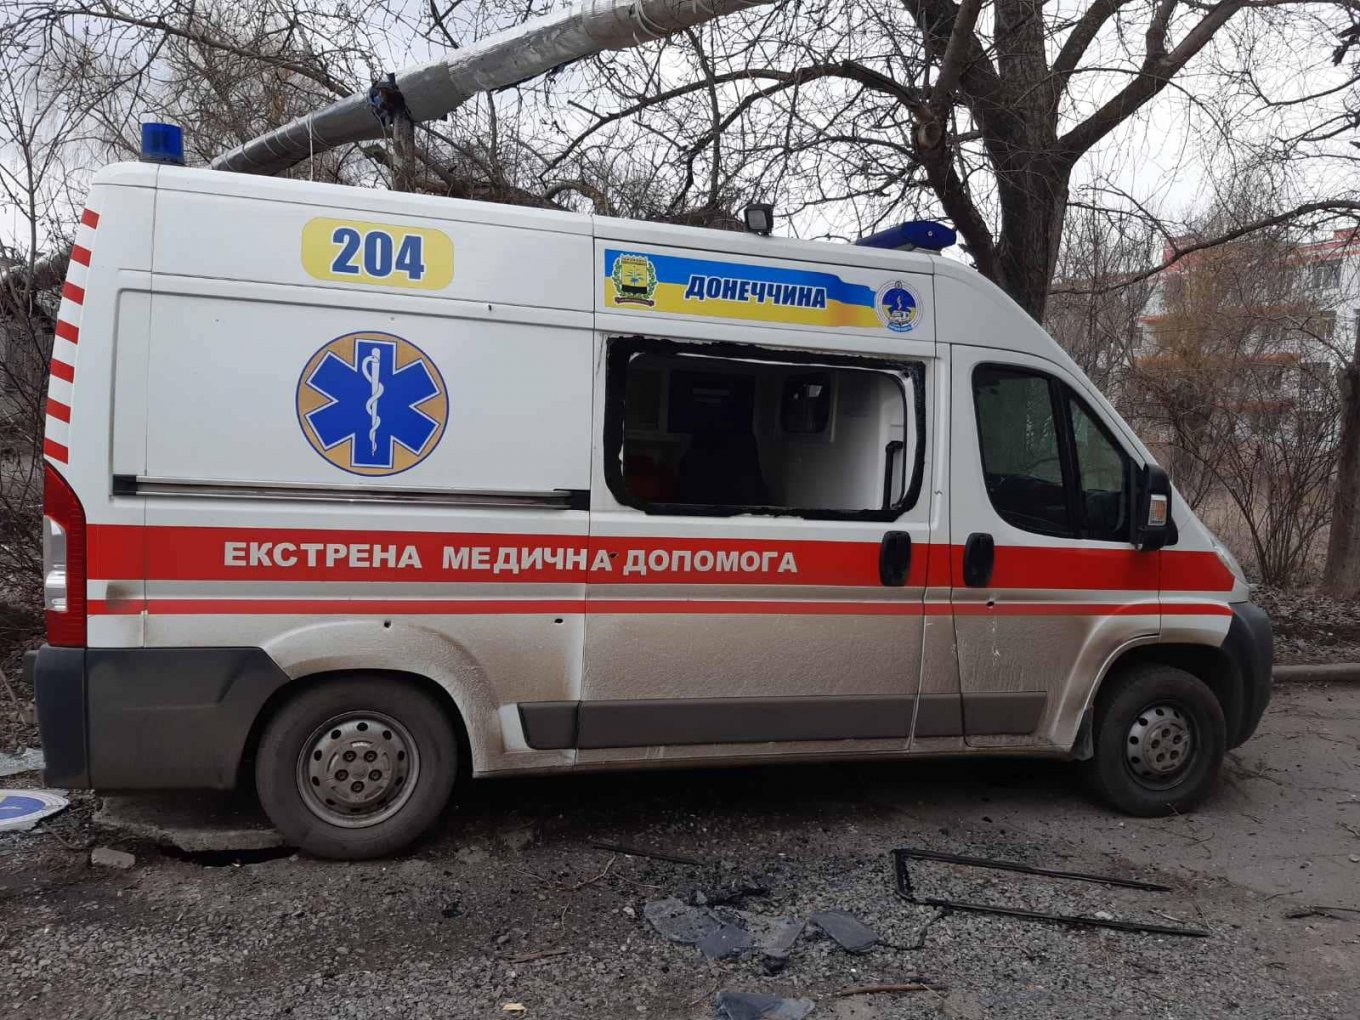 Defense Express / An ambulance after getting shot by Russian military / Ukraine Withstands Russian Aggression on Day Two of Large-Scale War – Live Updates